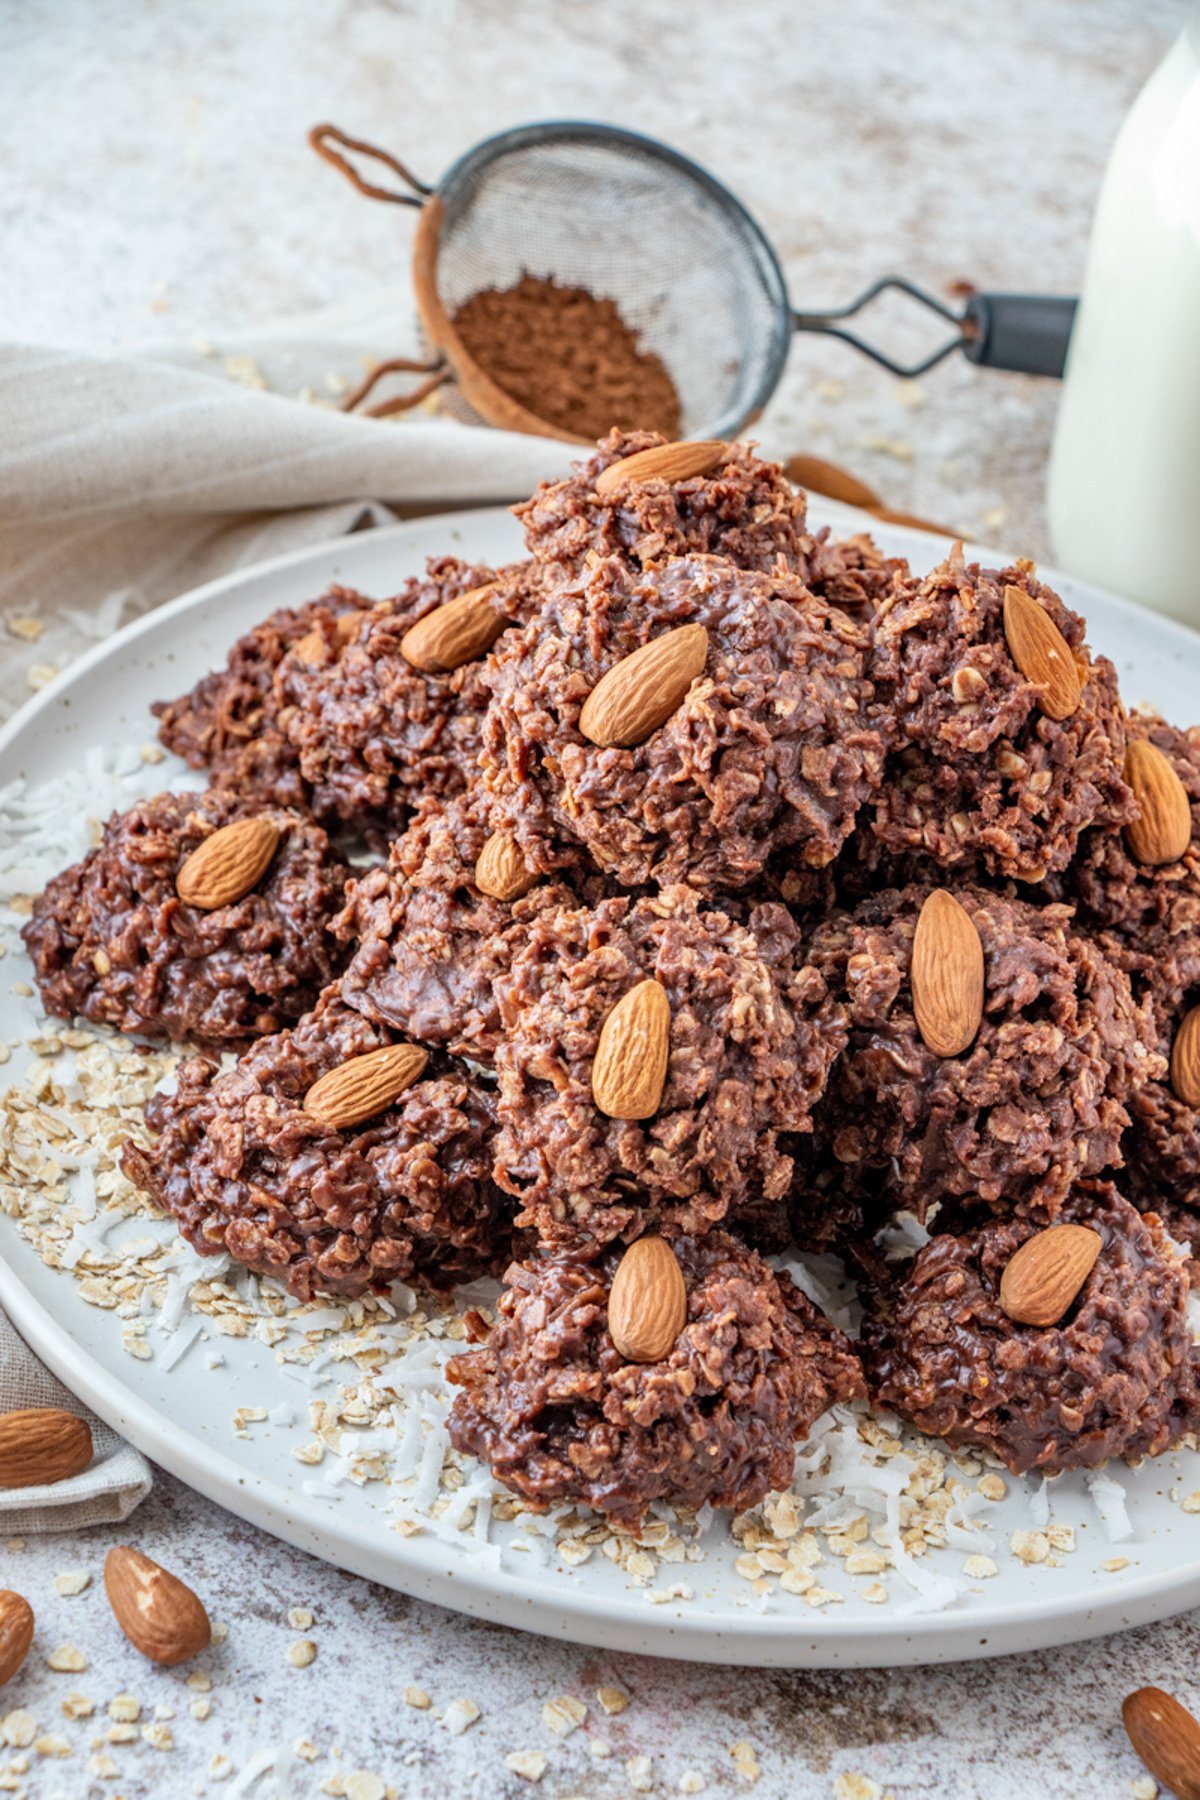 Plate full of No Bake Almond Joy Cookies topped with almonds